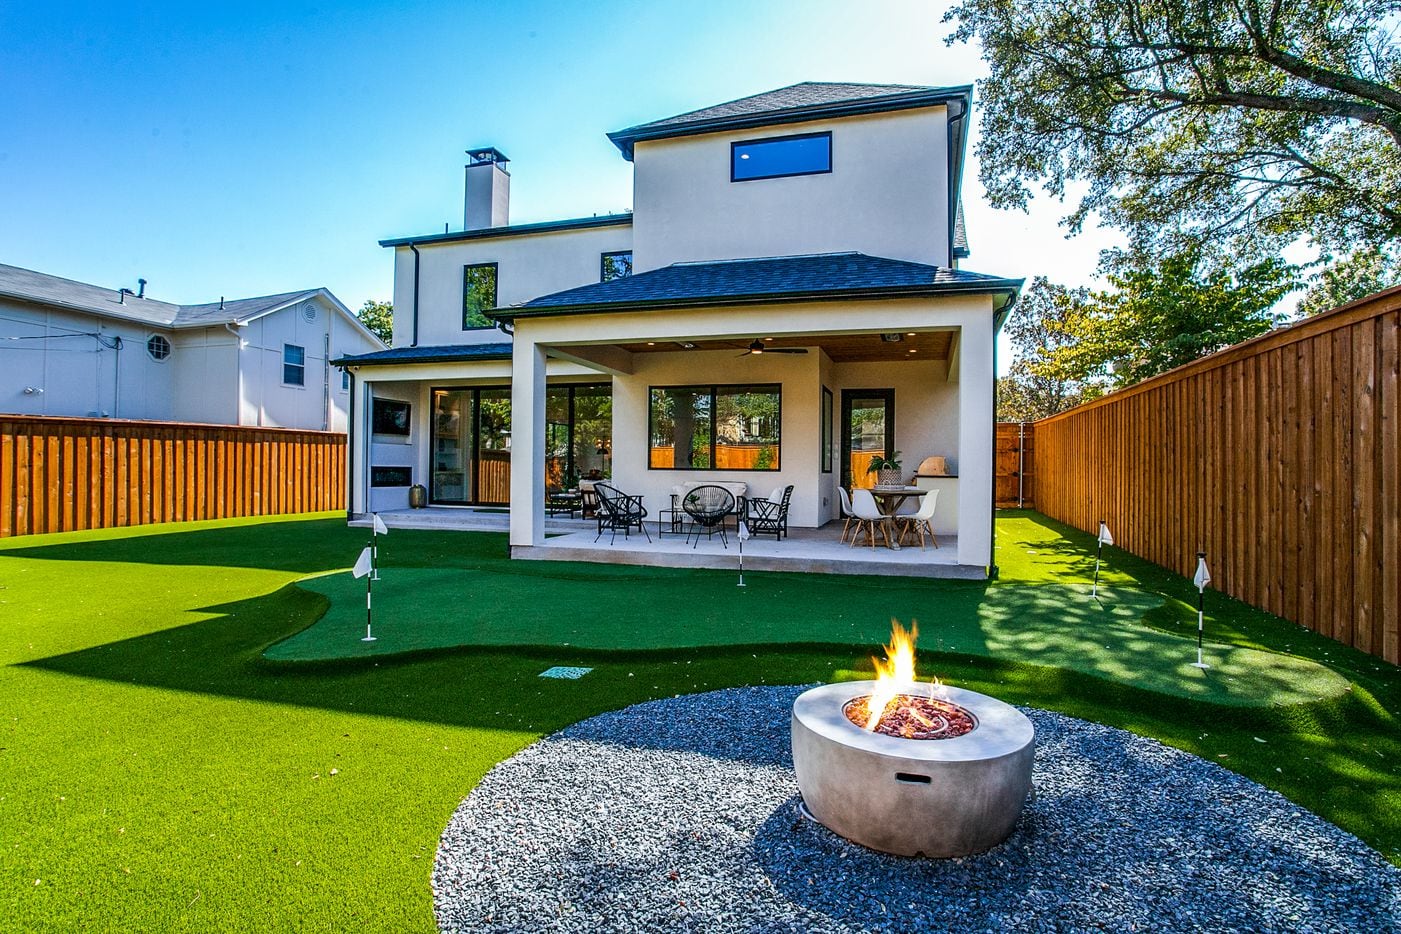 Bonus backyard features include a mini putting green, a dog run, a fire pit and turf.